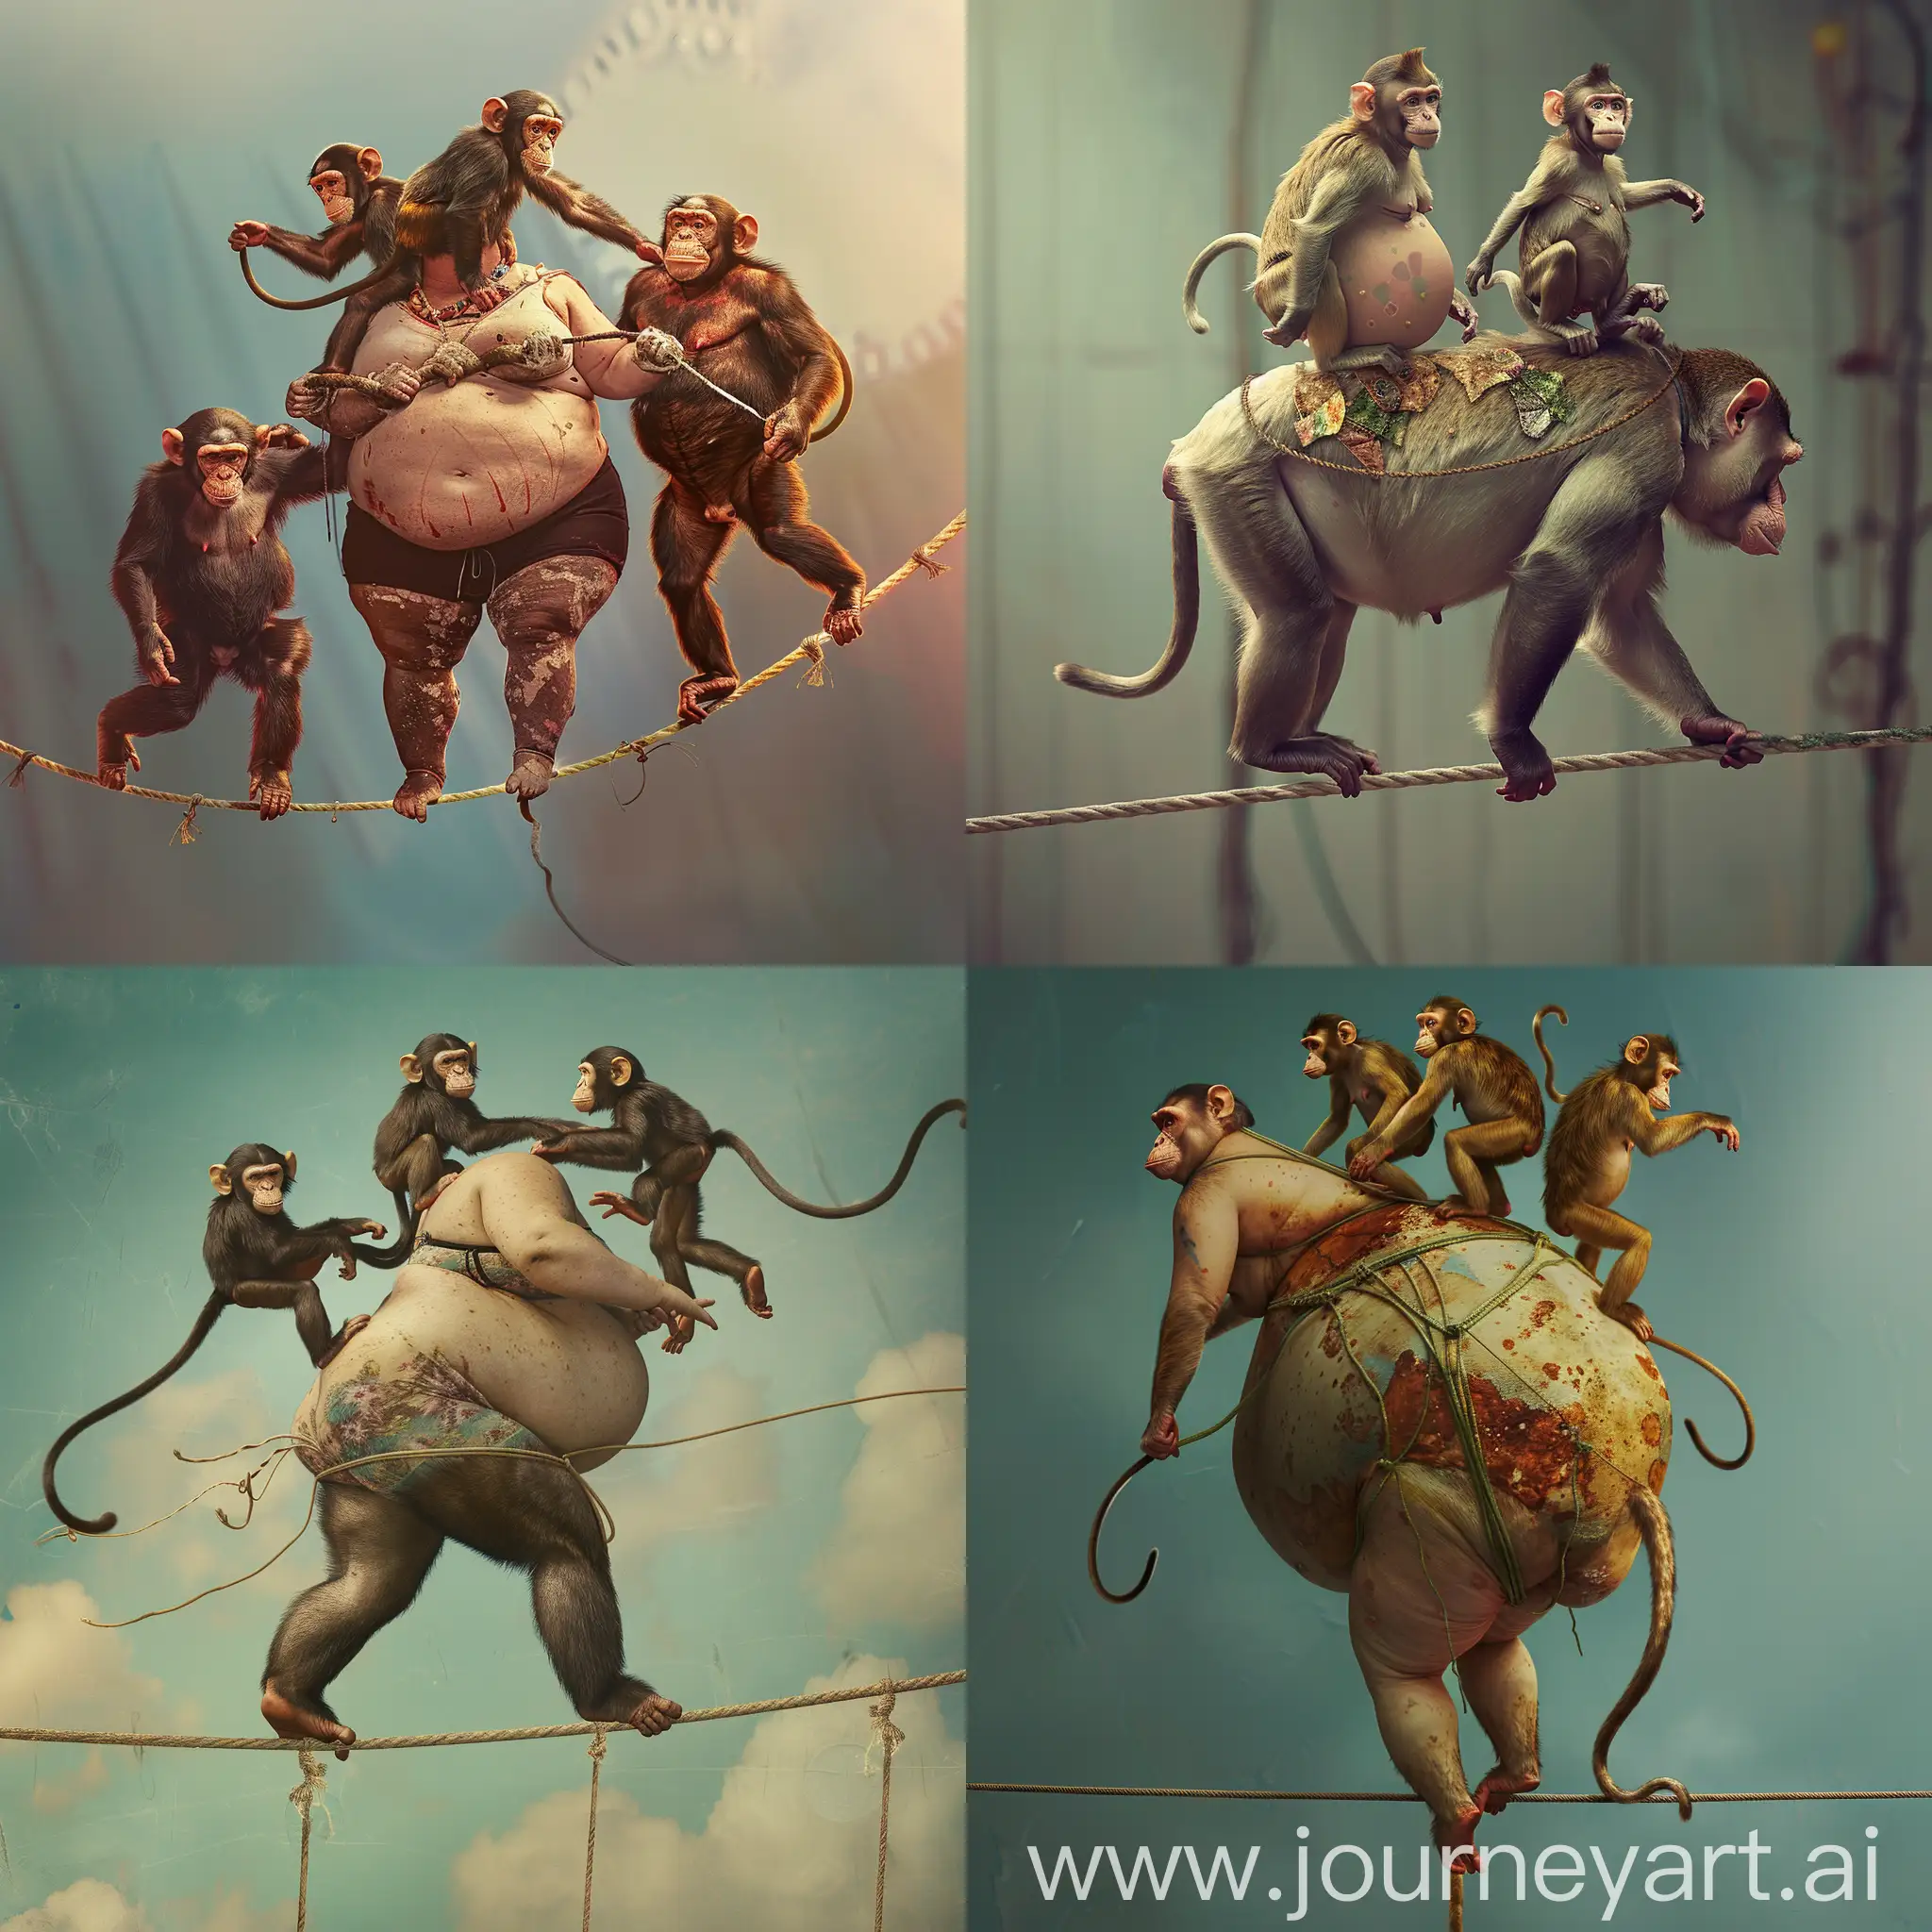 4 ugly monkeys on the back of a fat and beautiful girl walking on a tightrope in a talent show